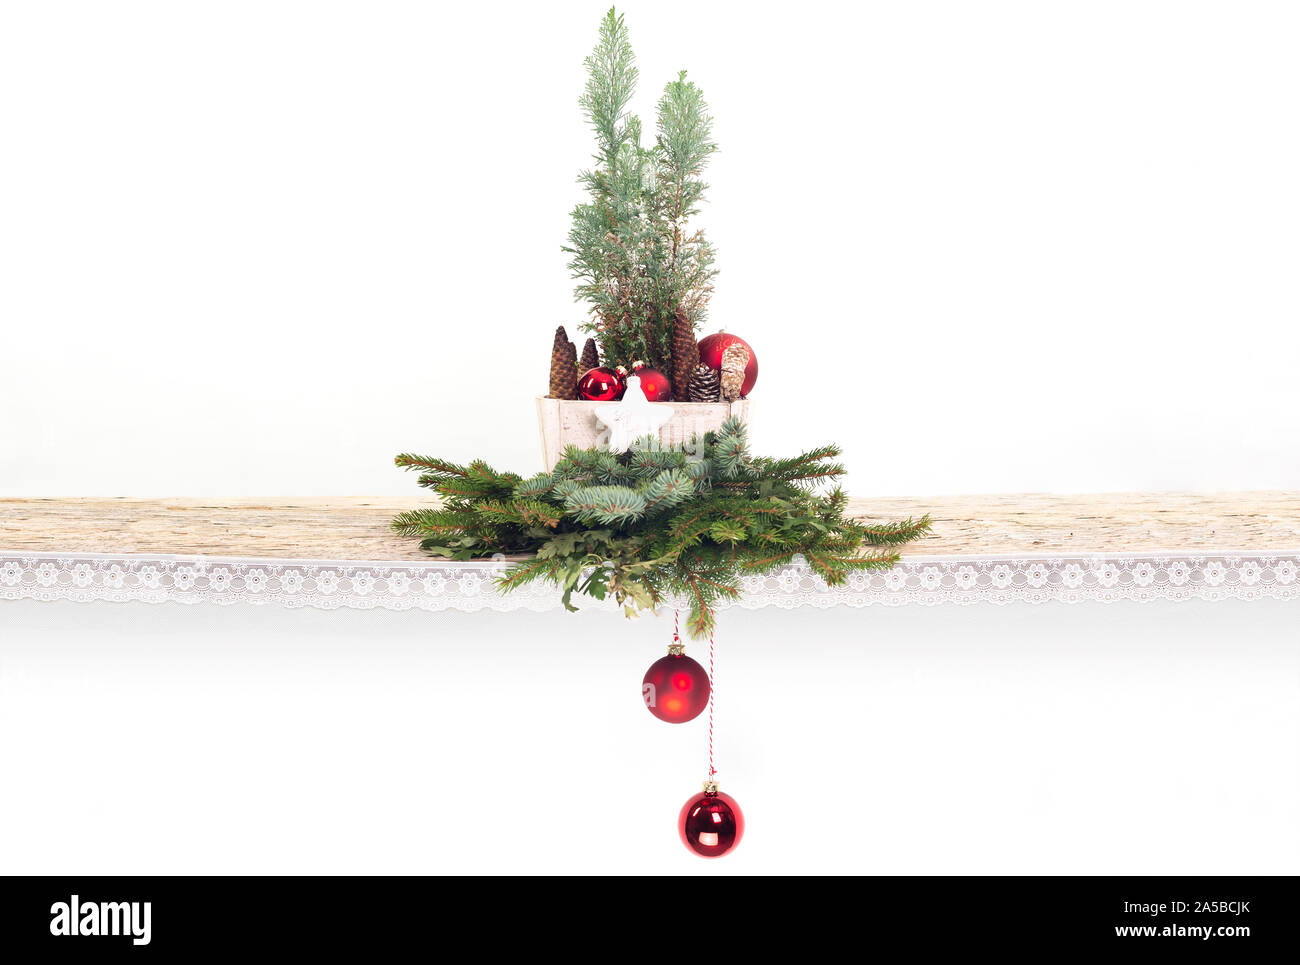 An old wooden board decorated with lace. Fir branches red and blue. A wooden box with conifer, pine cones and balls. 2 red Christmas balls are hanging Stock Photo